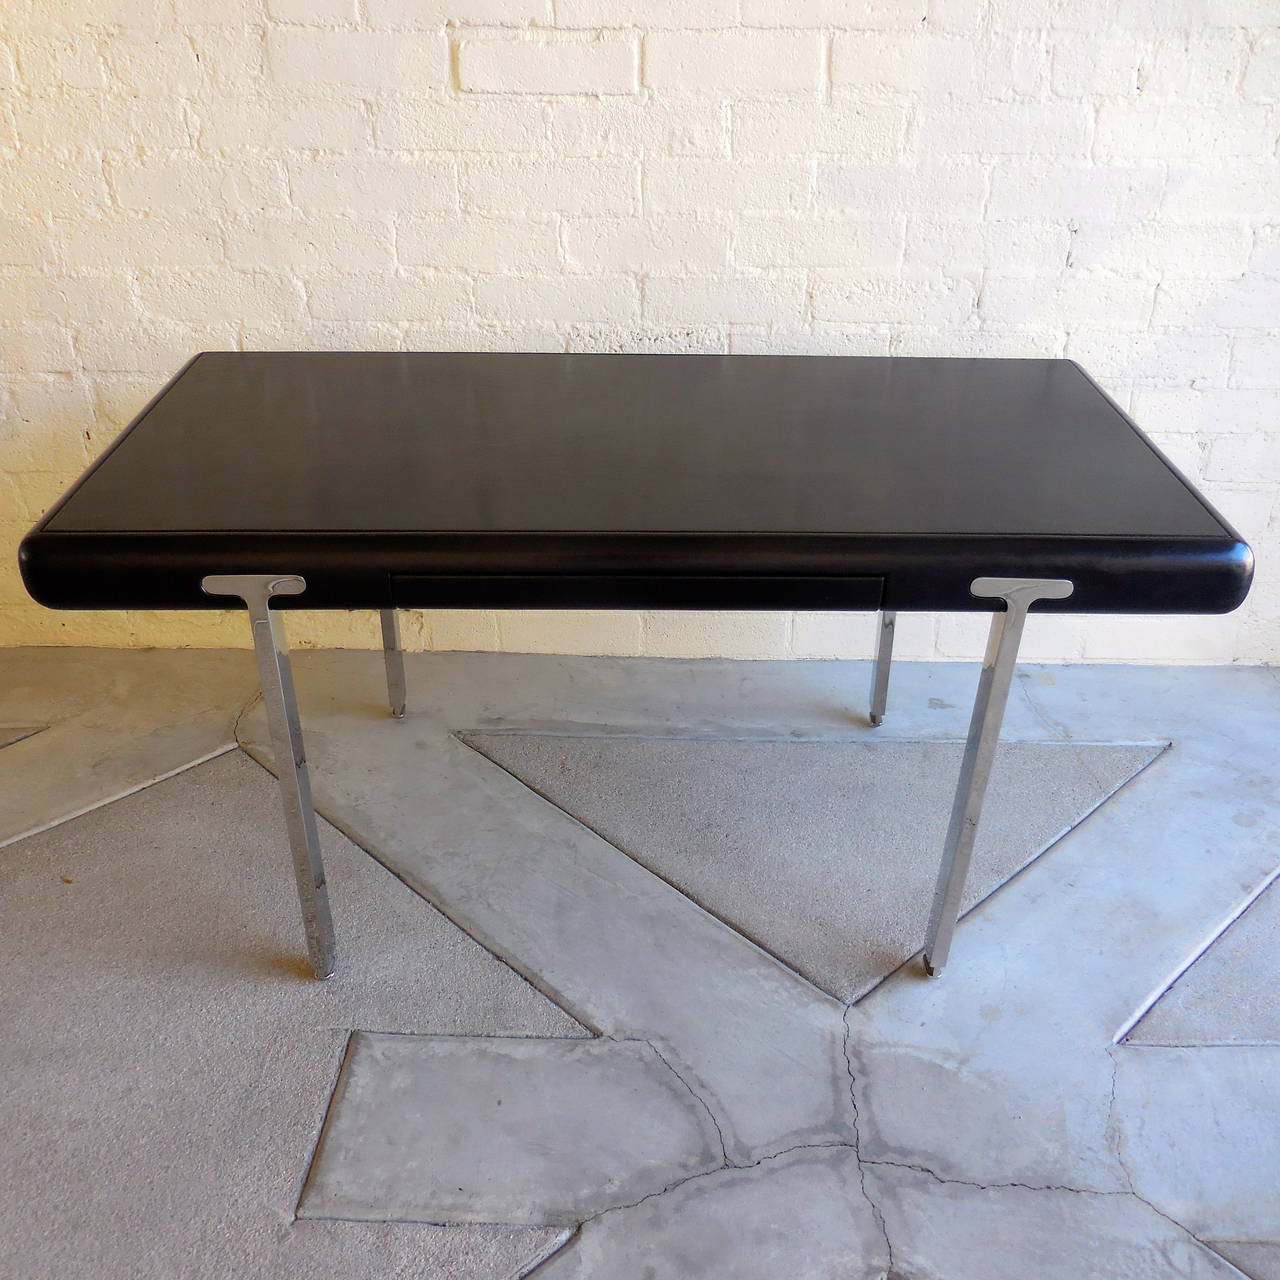 Late 20th Century Handsome Black Leather Topped Chrome Leg Writing Table, circa 1970s